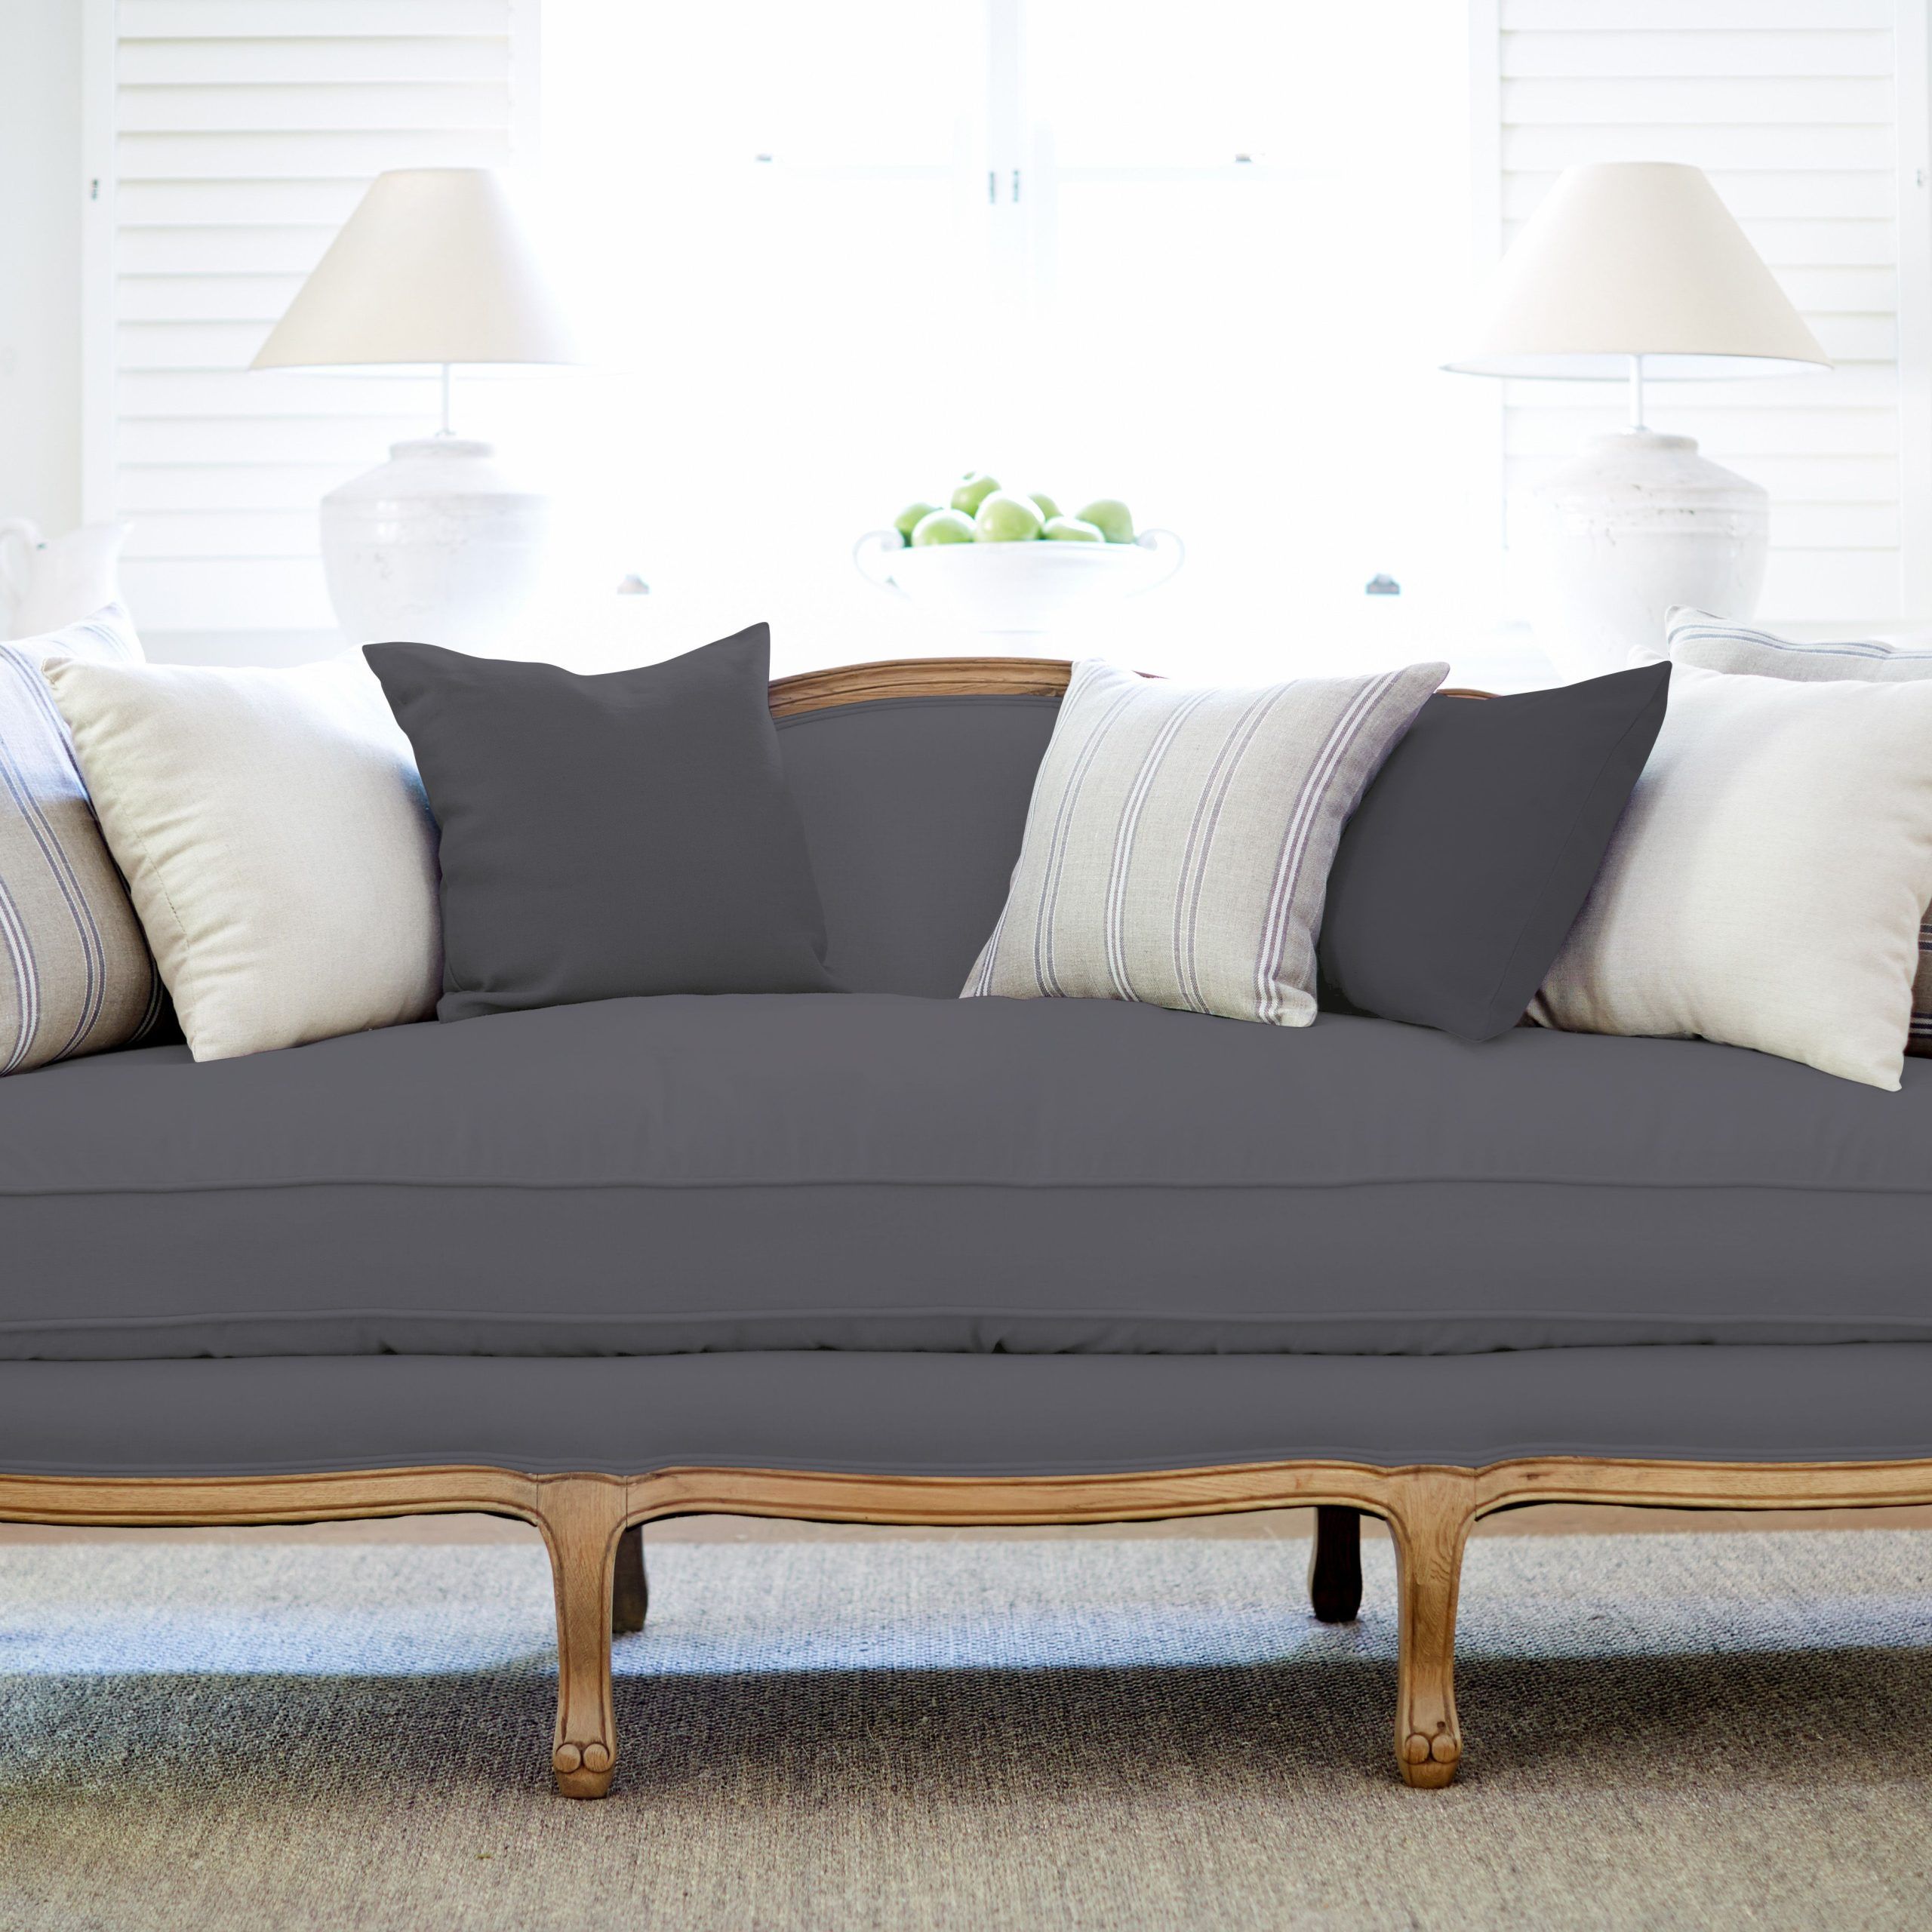 Charcoal Linen Sofa | Sofa Design, Sofa Styling, Sofa Makeover Within Light Charcoal Linen Sofas (Gallery 8 of 20)